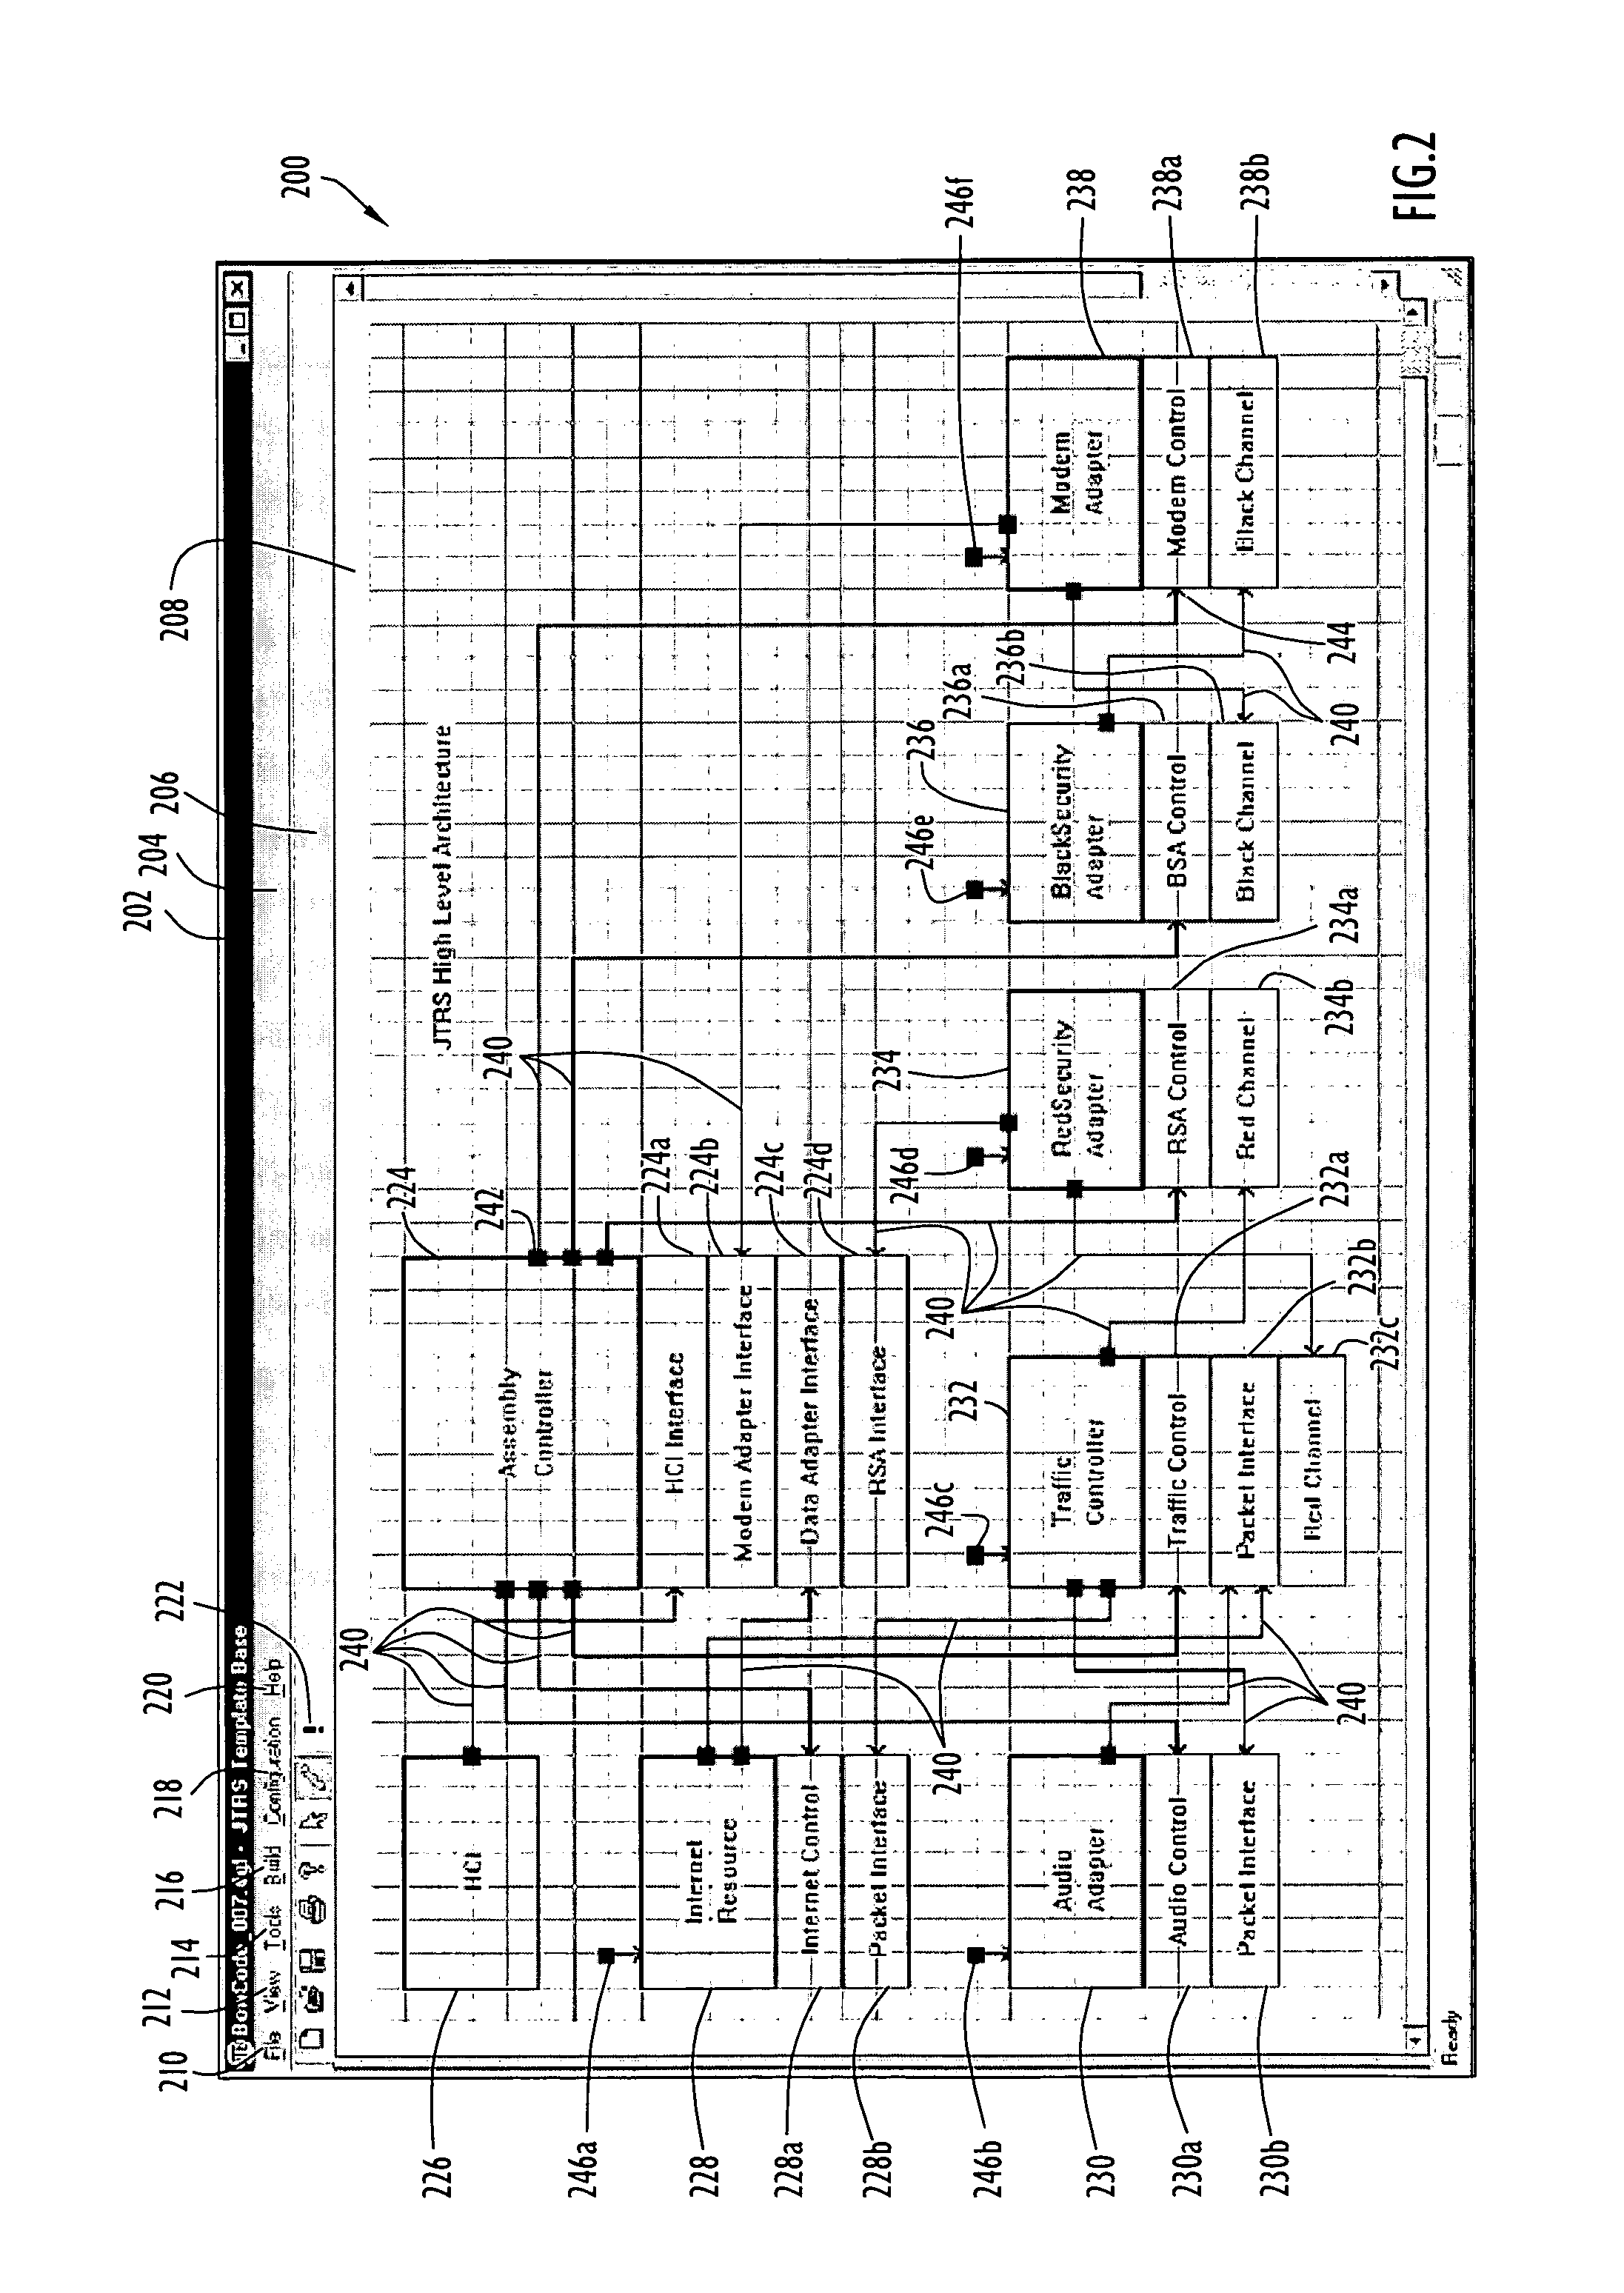 Method and apparatus for developing standard architecture compliant software for programmable radios